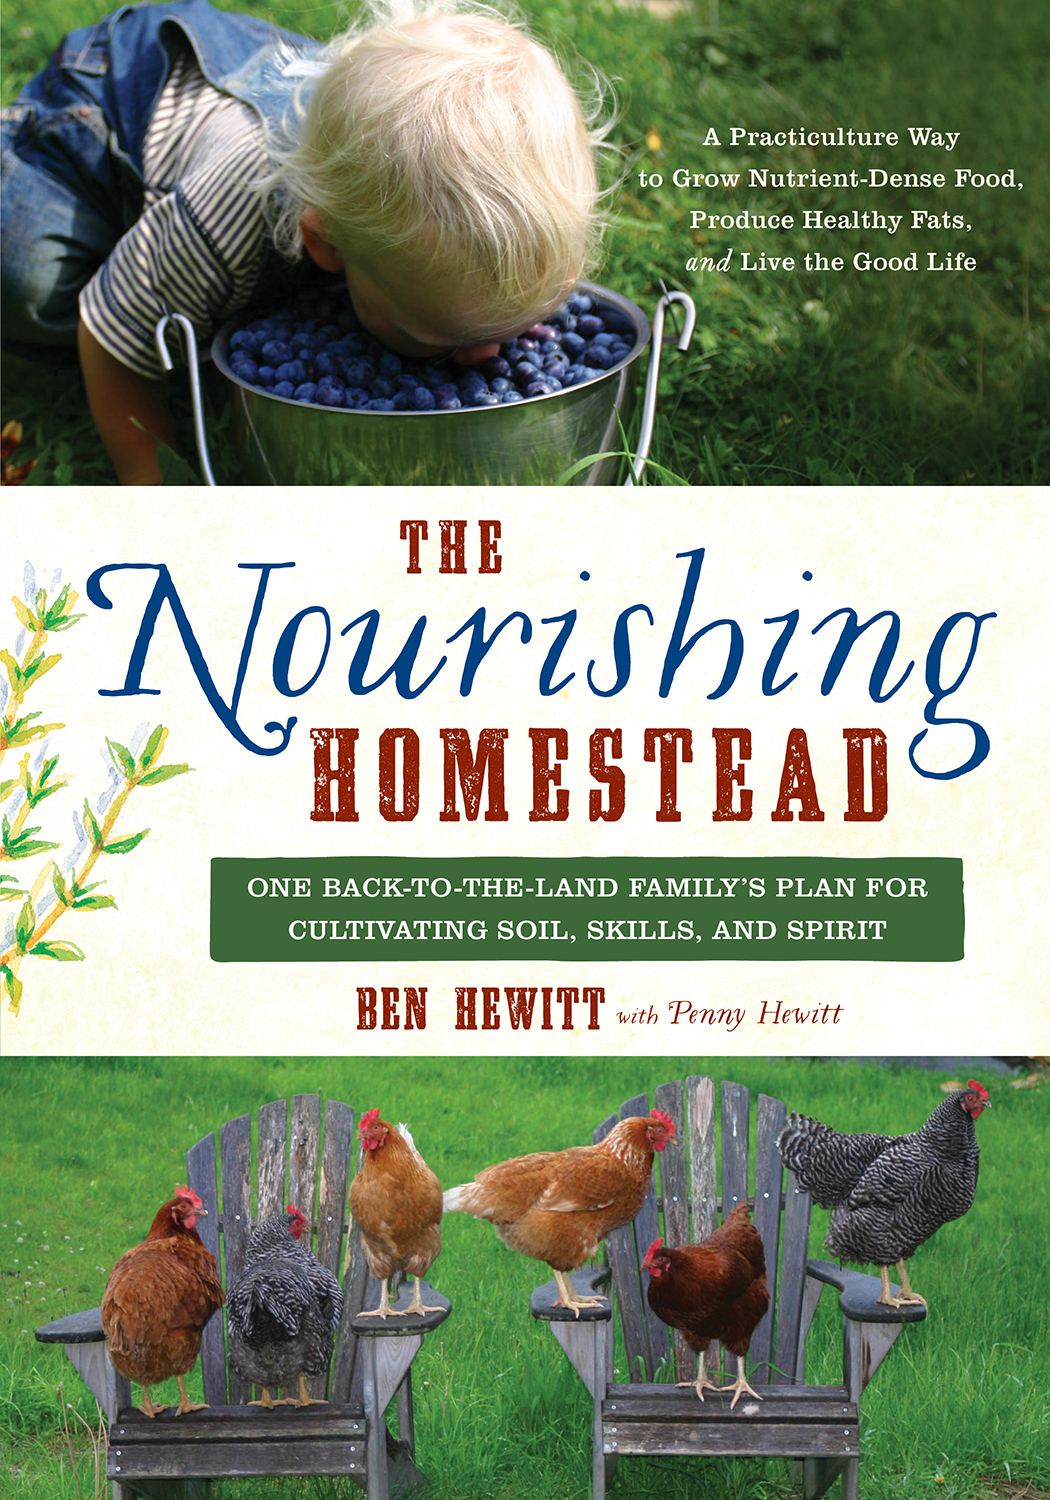 The nourishing homestead one back-to-the-land family's plan for cultivating soil, skills, and spirit cover image